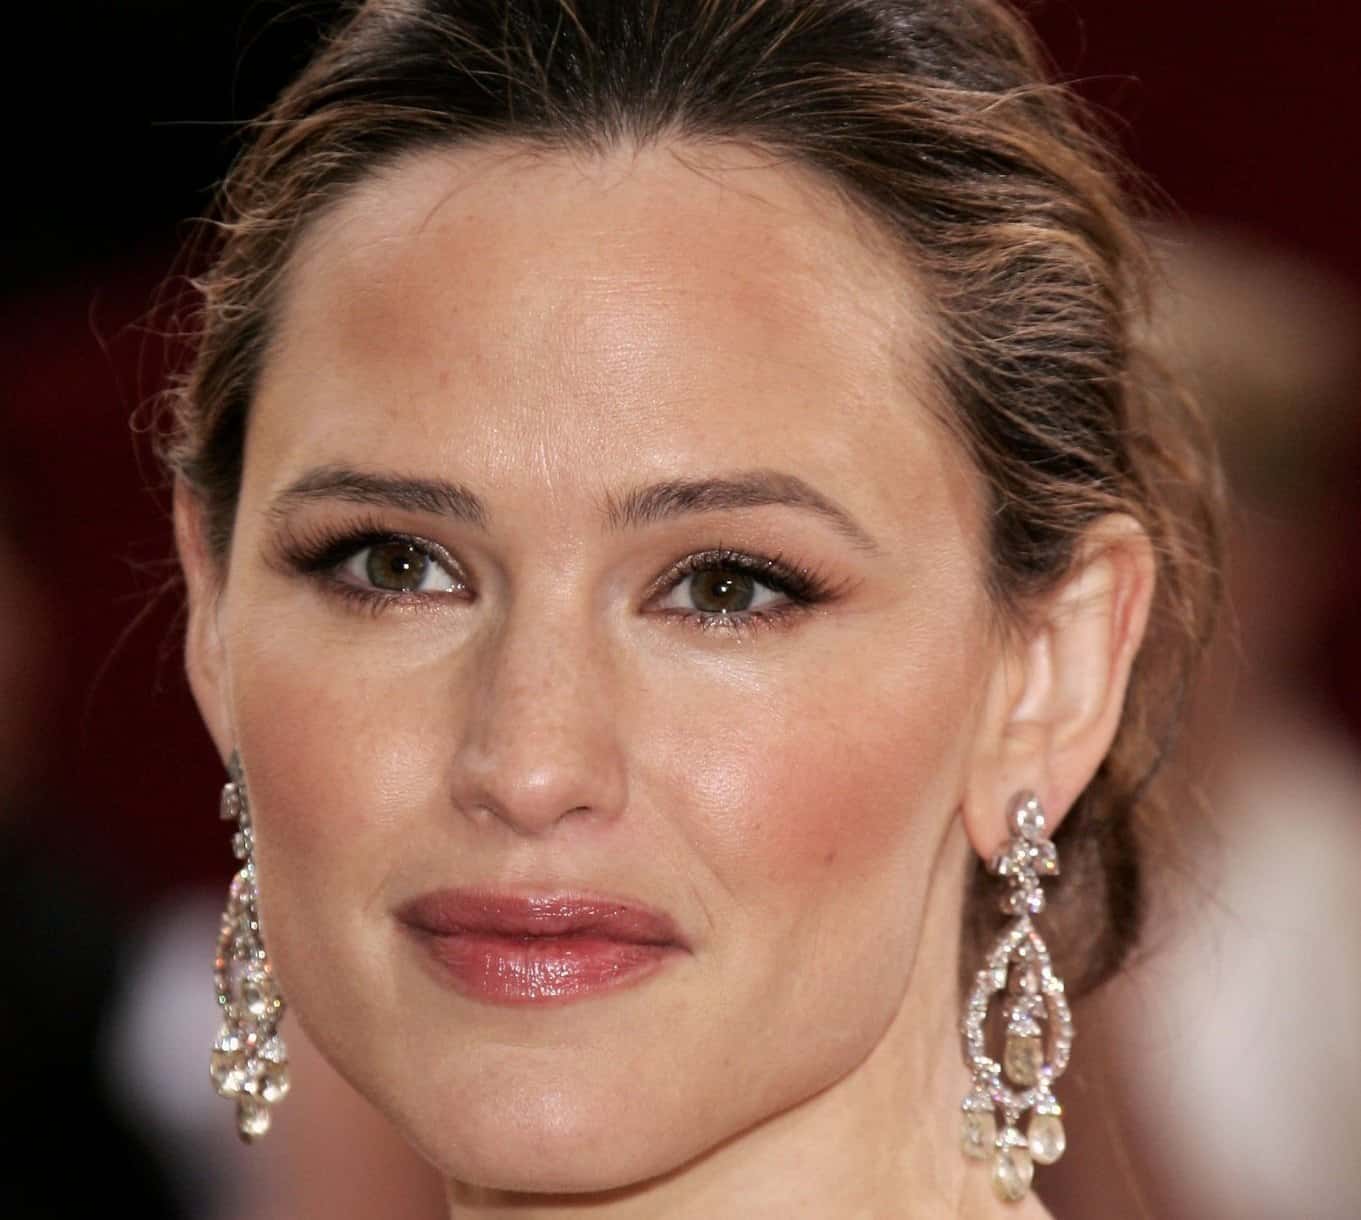 27 Wholesome Facts About Jennifer Garner 